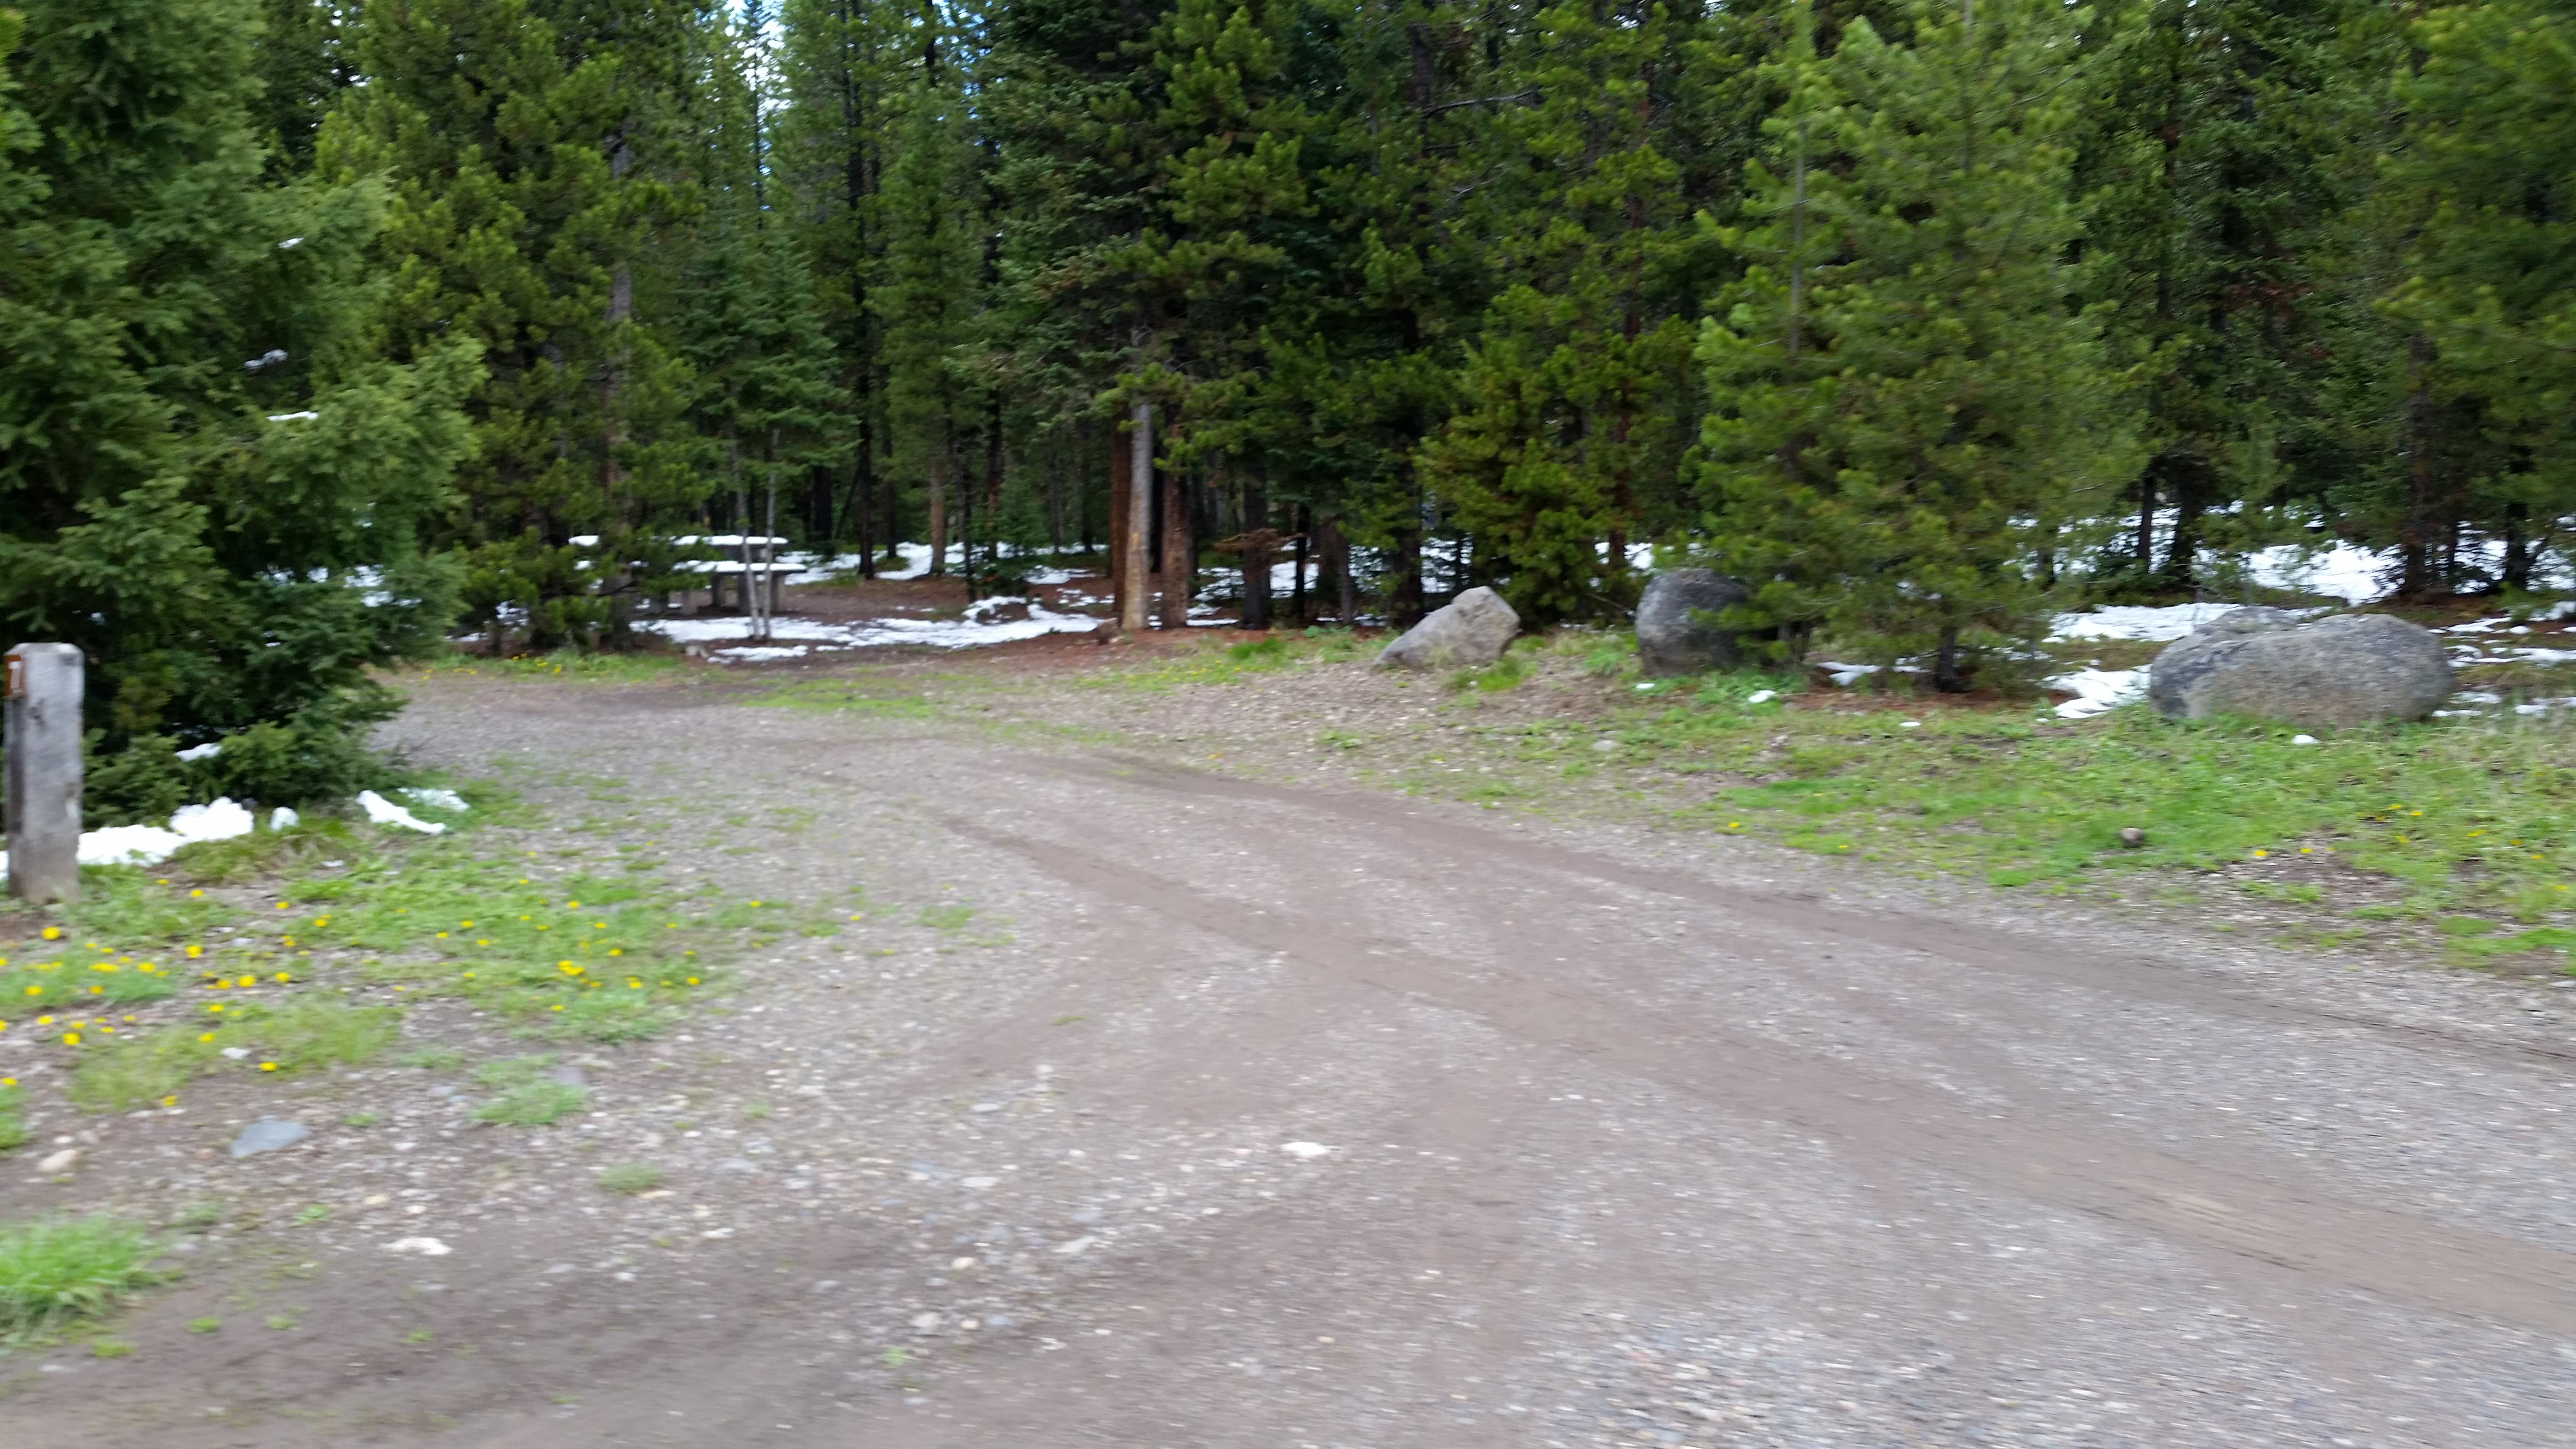 Camper submitted image from Chisholm Campground - 3